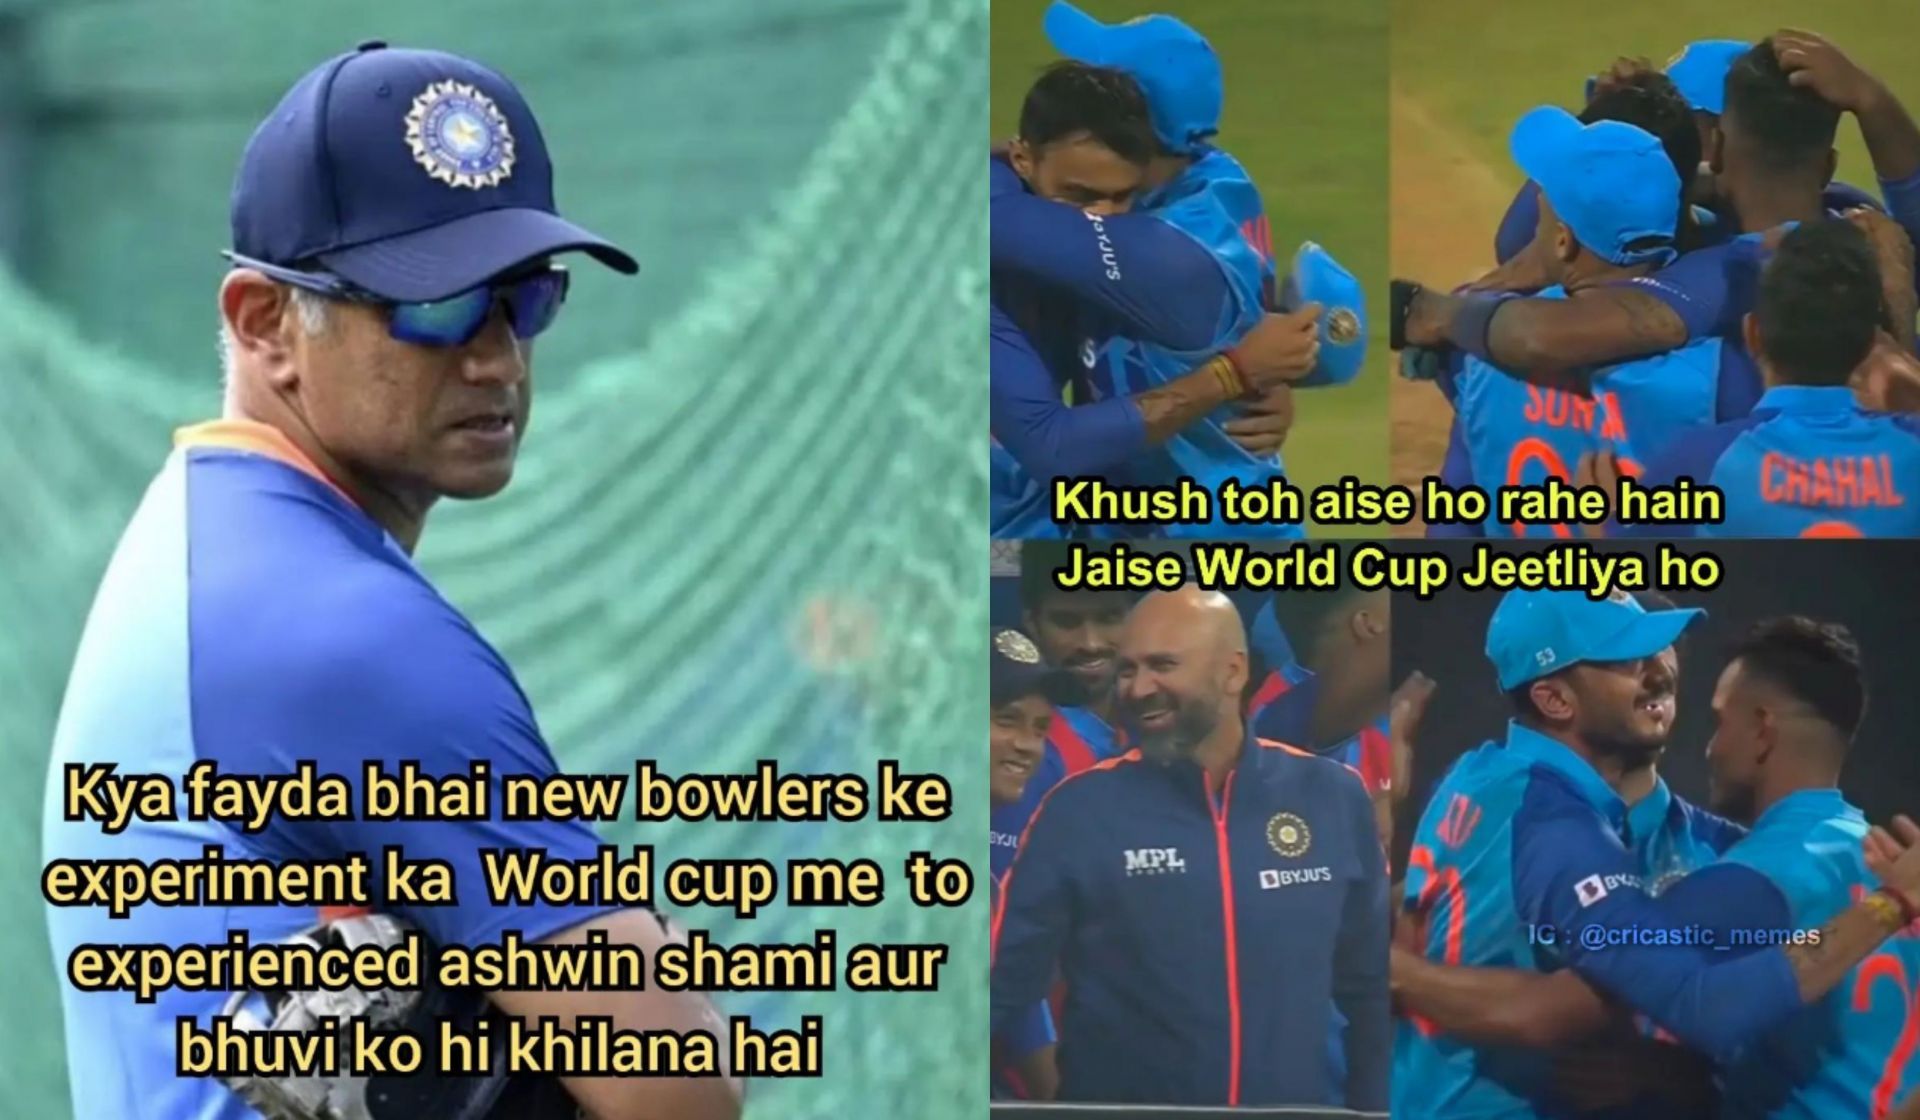 Fans share memes after India win the 1st T20I vs Sri Lanka on Tuesday.